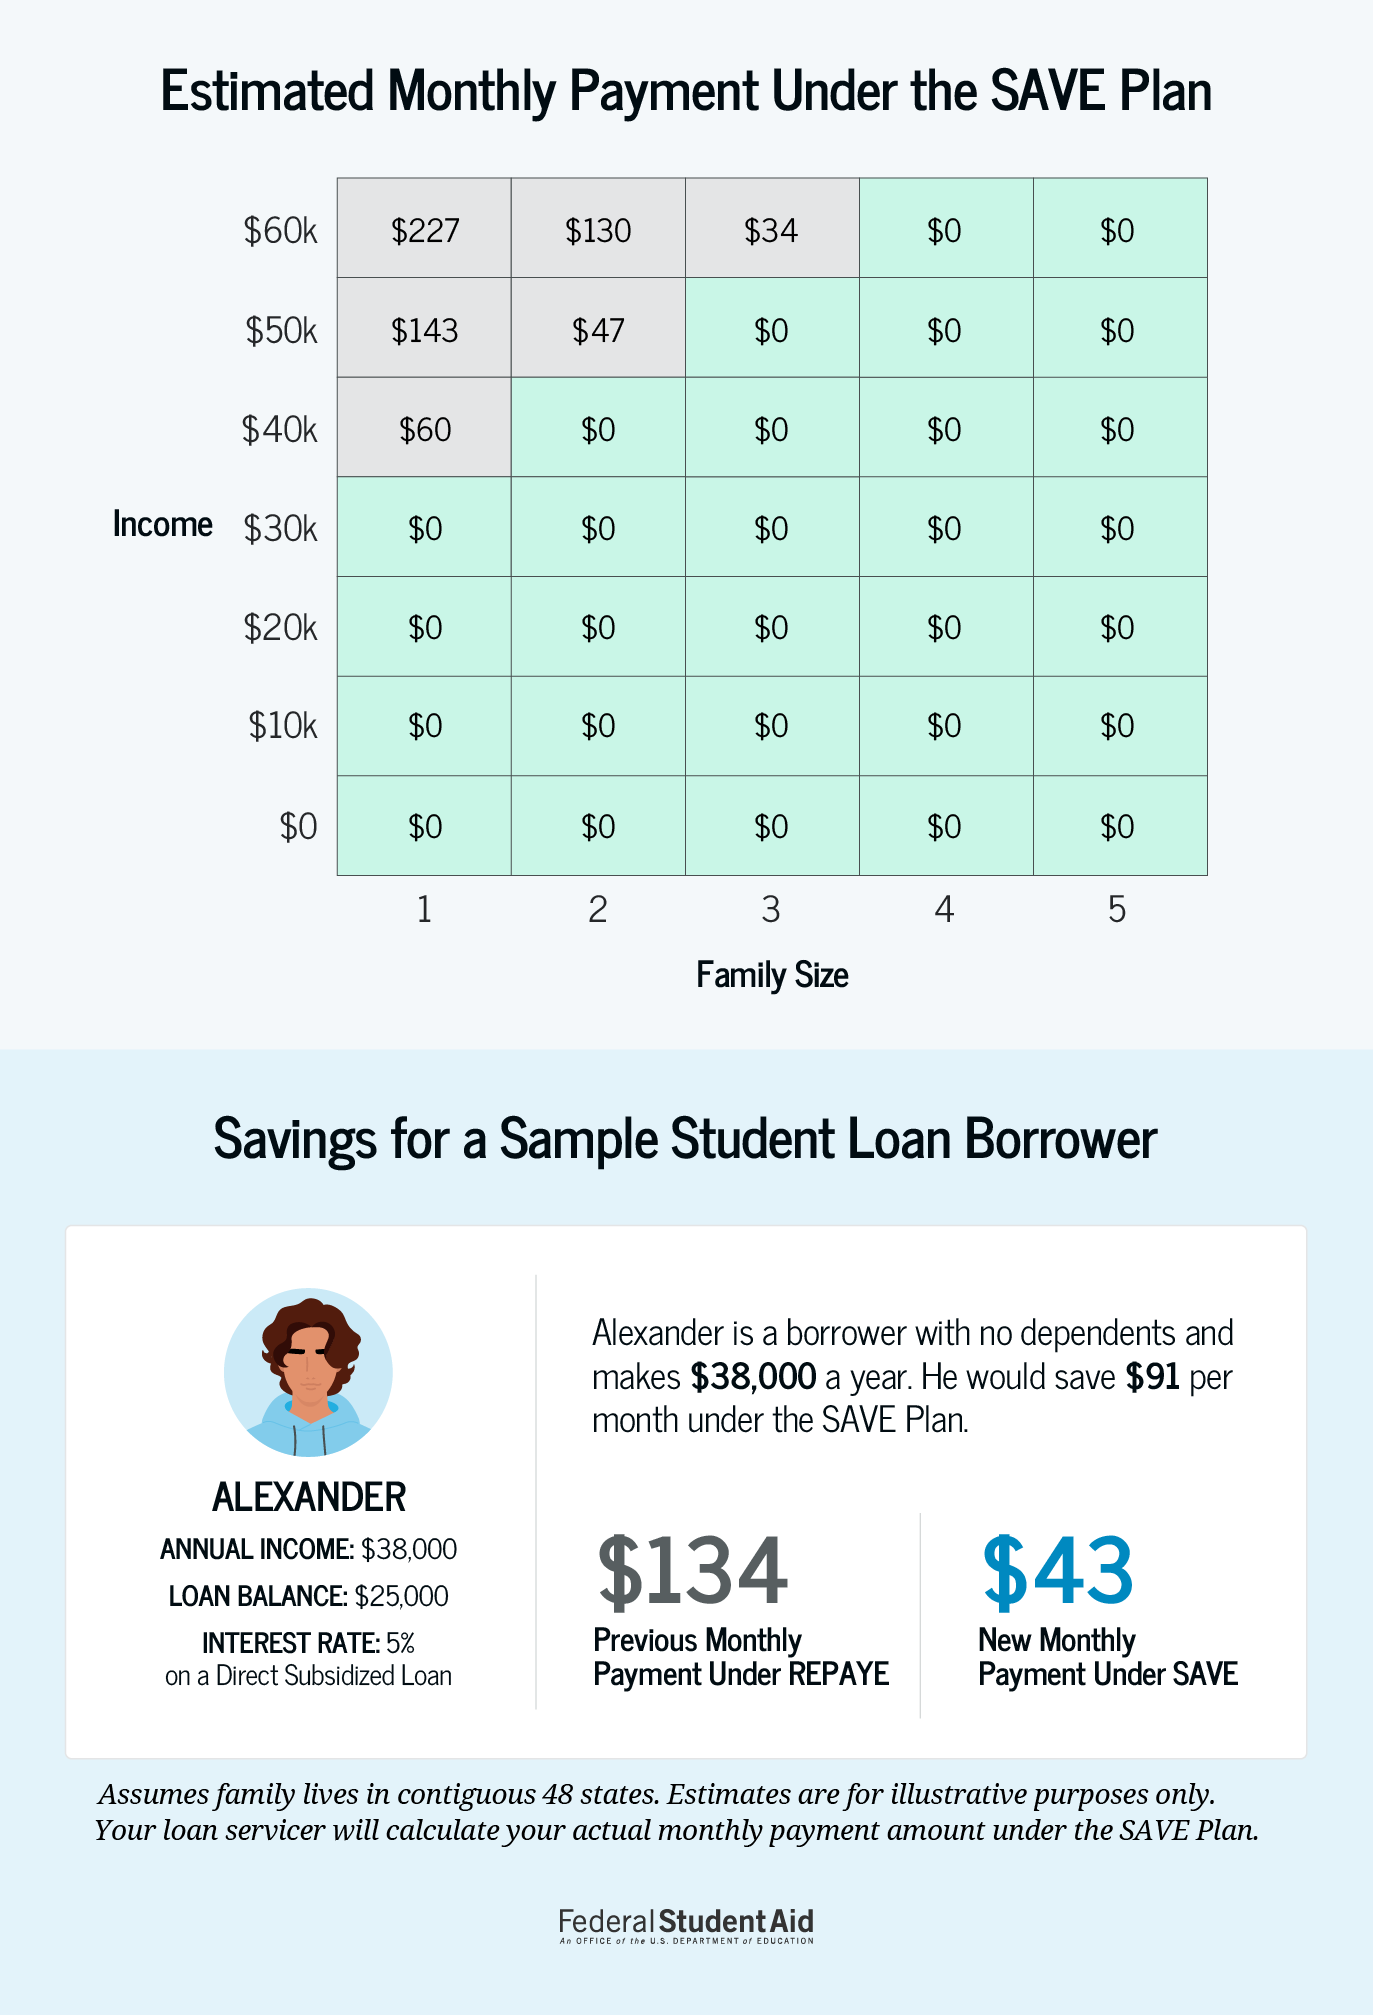 The SAVE Plan's benefits are more pronounced for lower incomes.